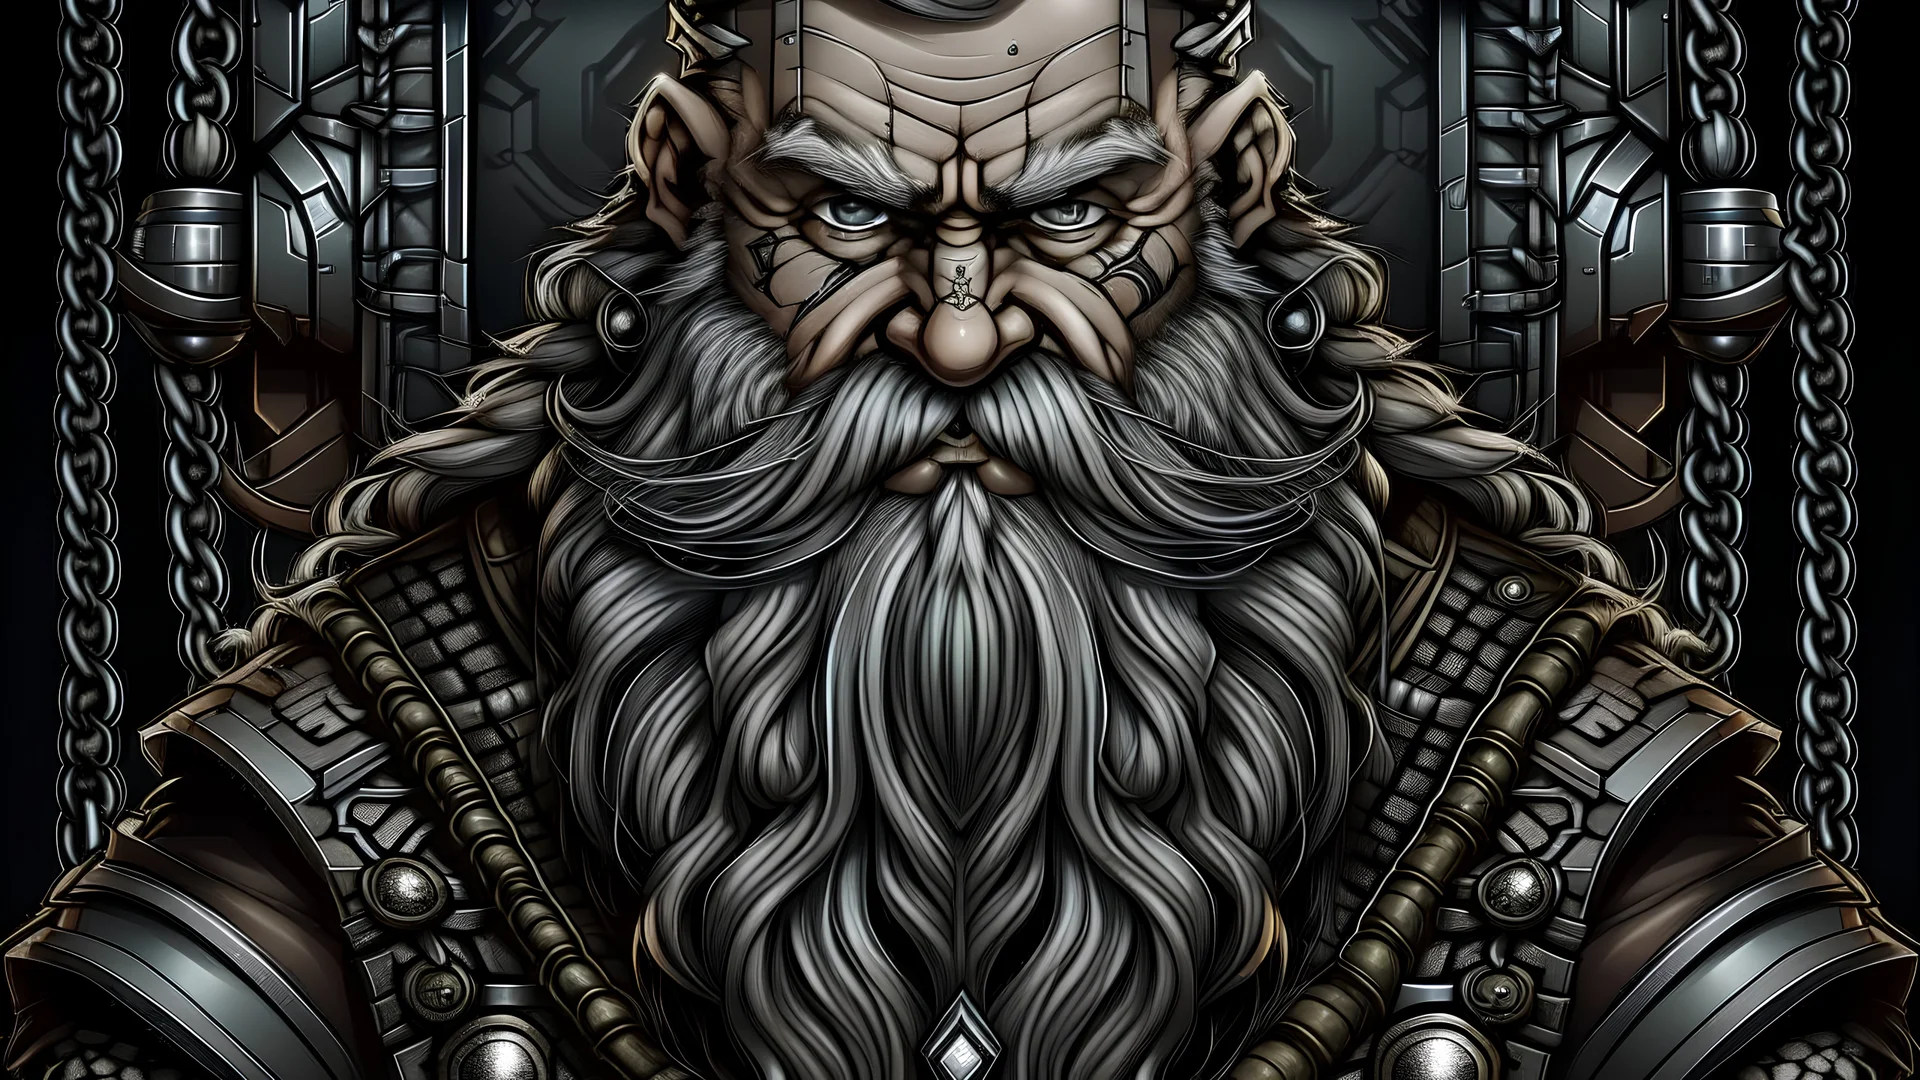 Cellshaded image of a Cyber hacker Dwarf, Gray and Black braided beard. Epic Canadian culture and pride.